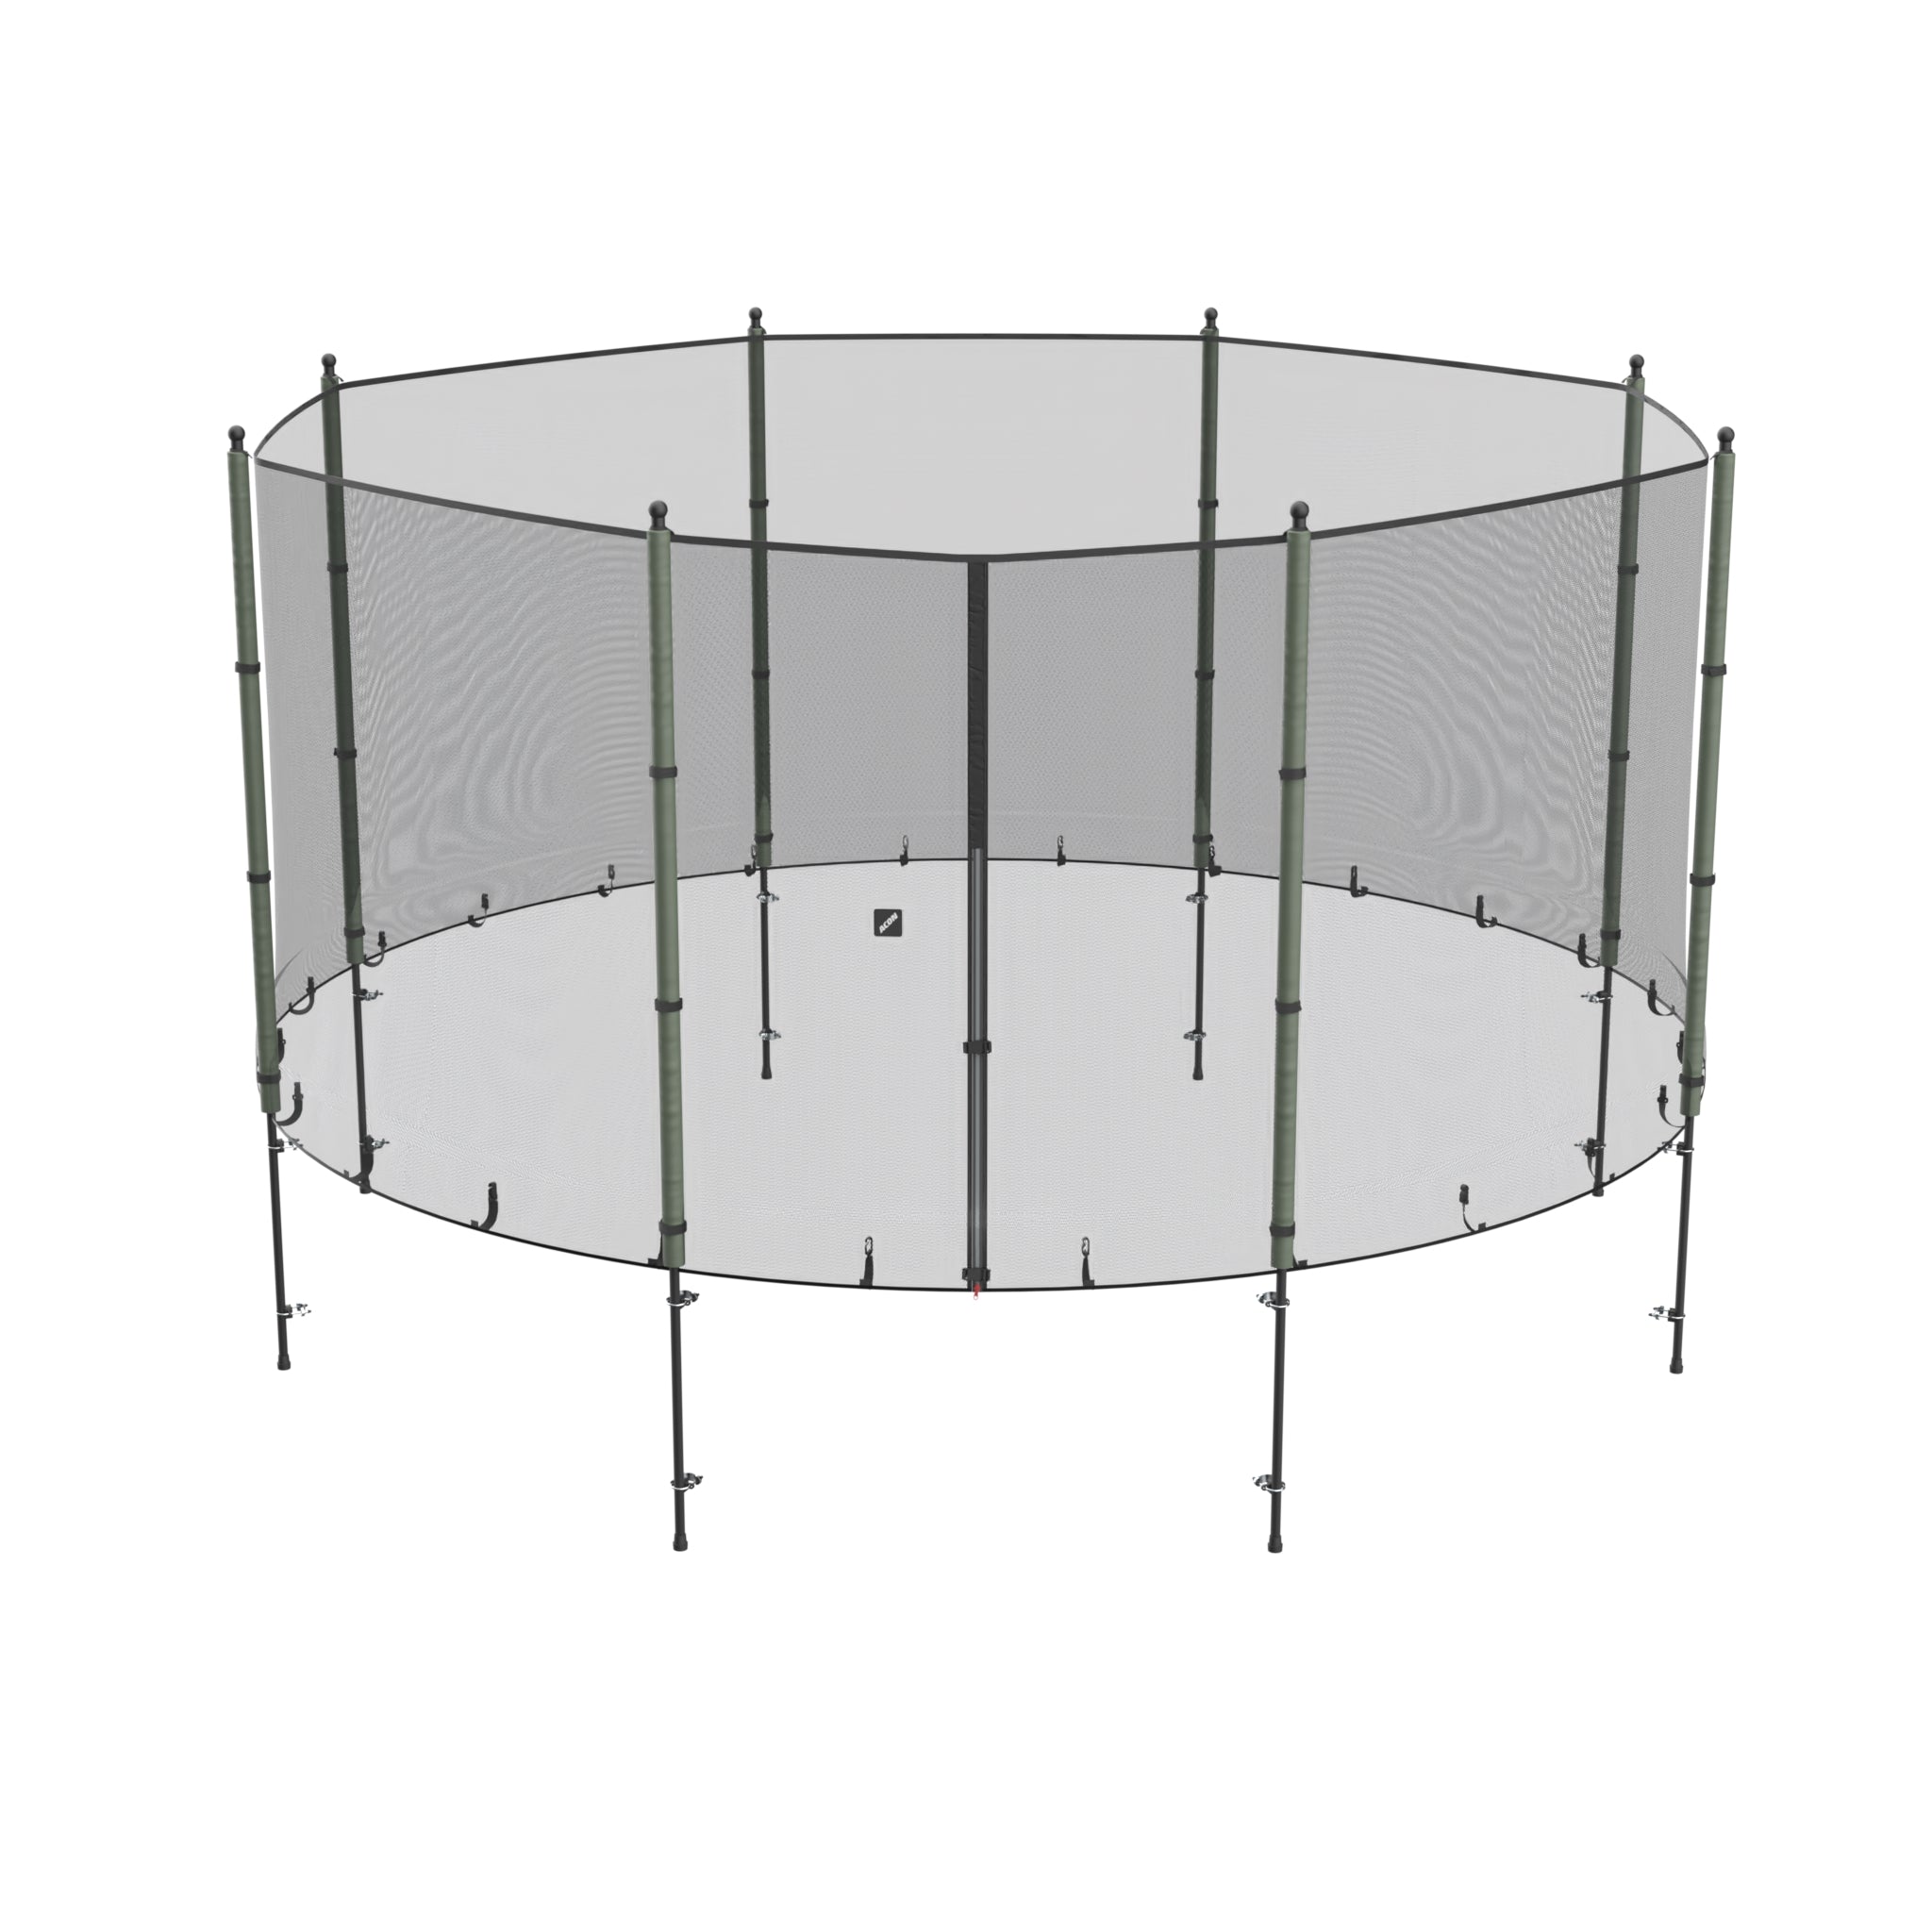 ACON Standard Enclosure for Round Trampolines (multiple sizes).